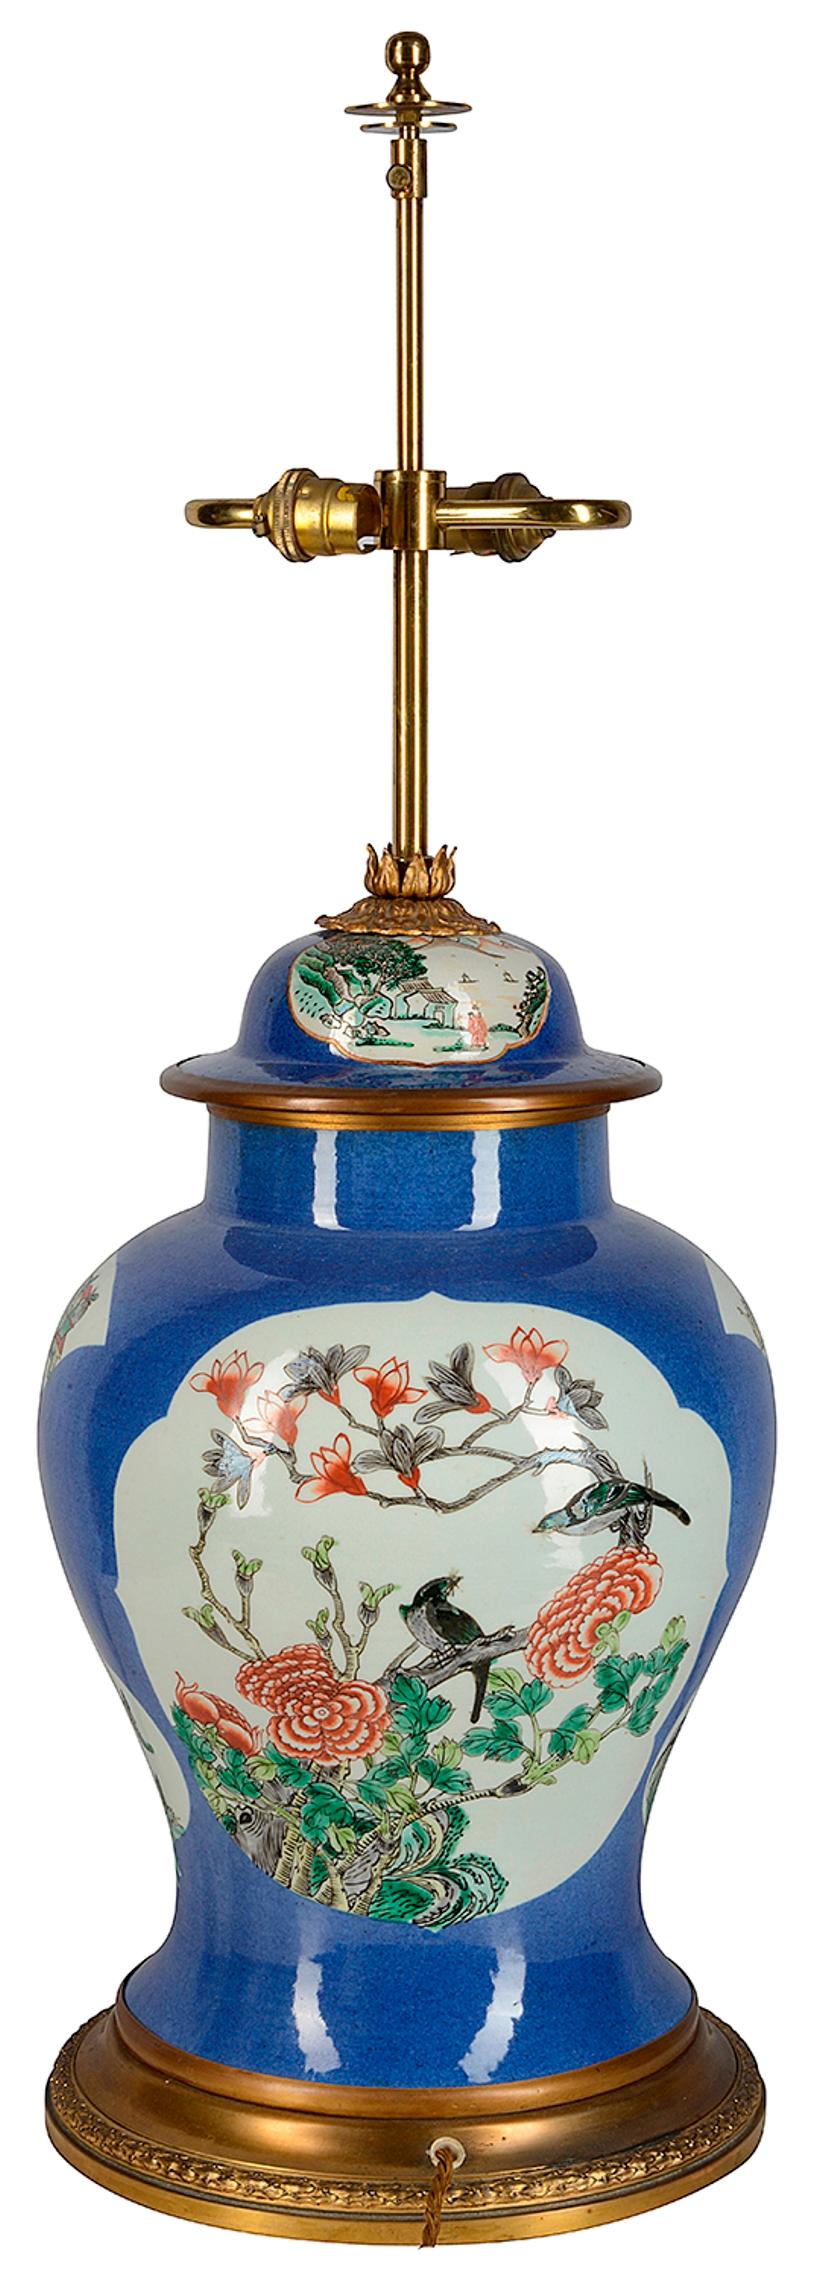 Hand-Painted Chinese Famille Verte Vase / Lamps, 19th Century